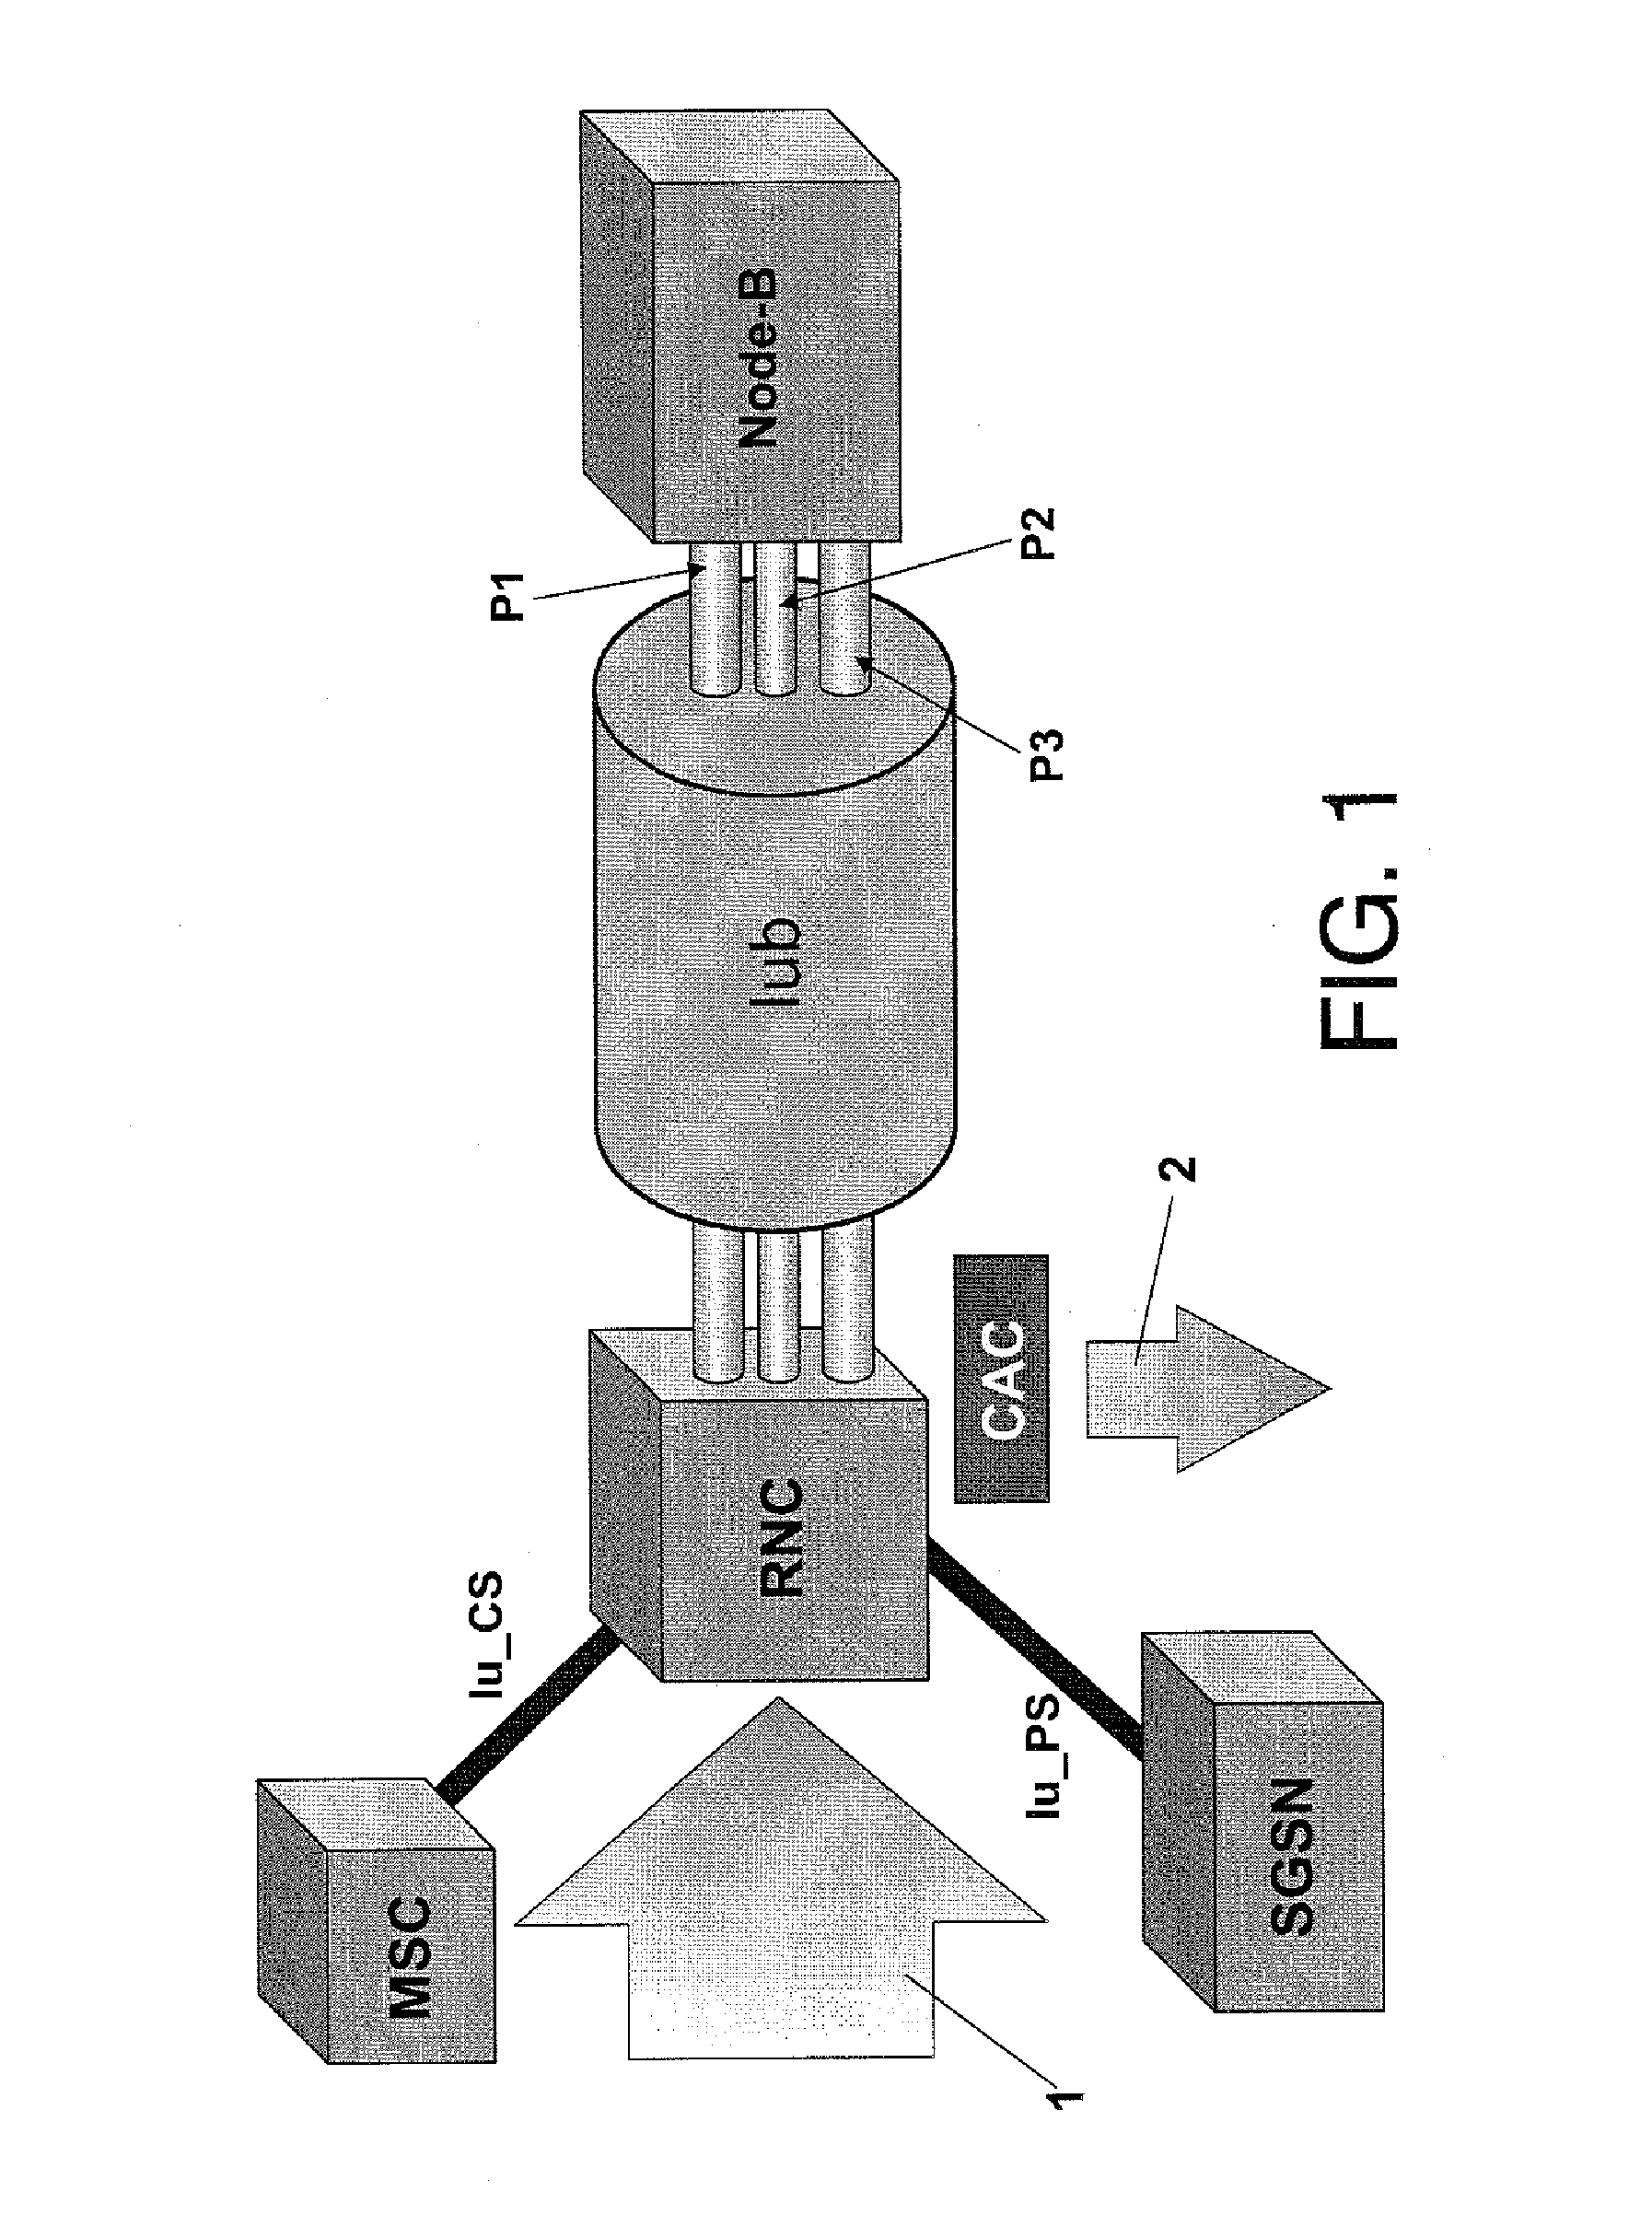 Method and device for controlling multi-path connections in radio access networks